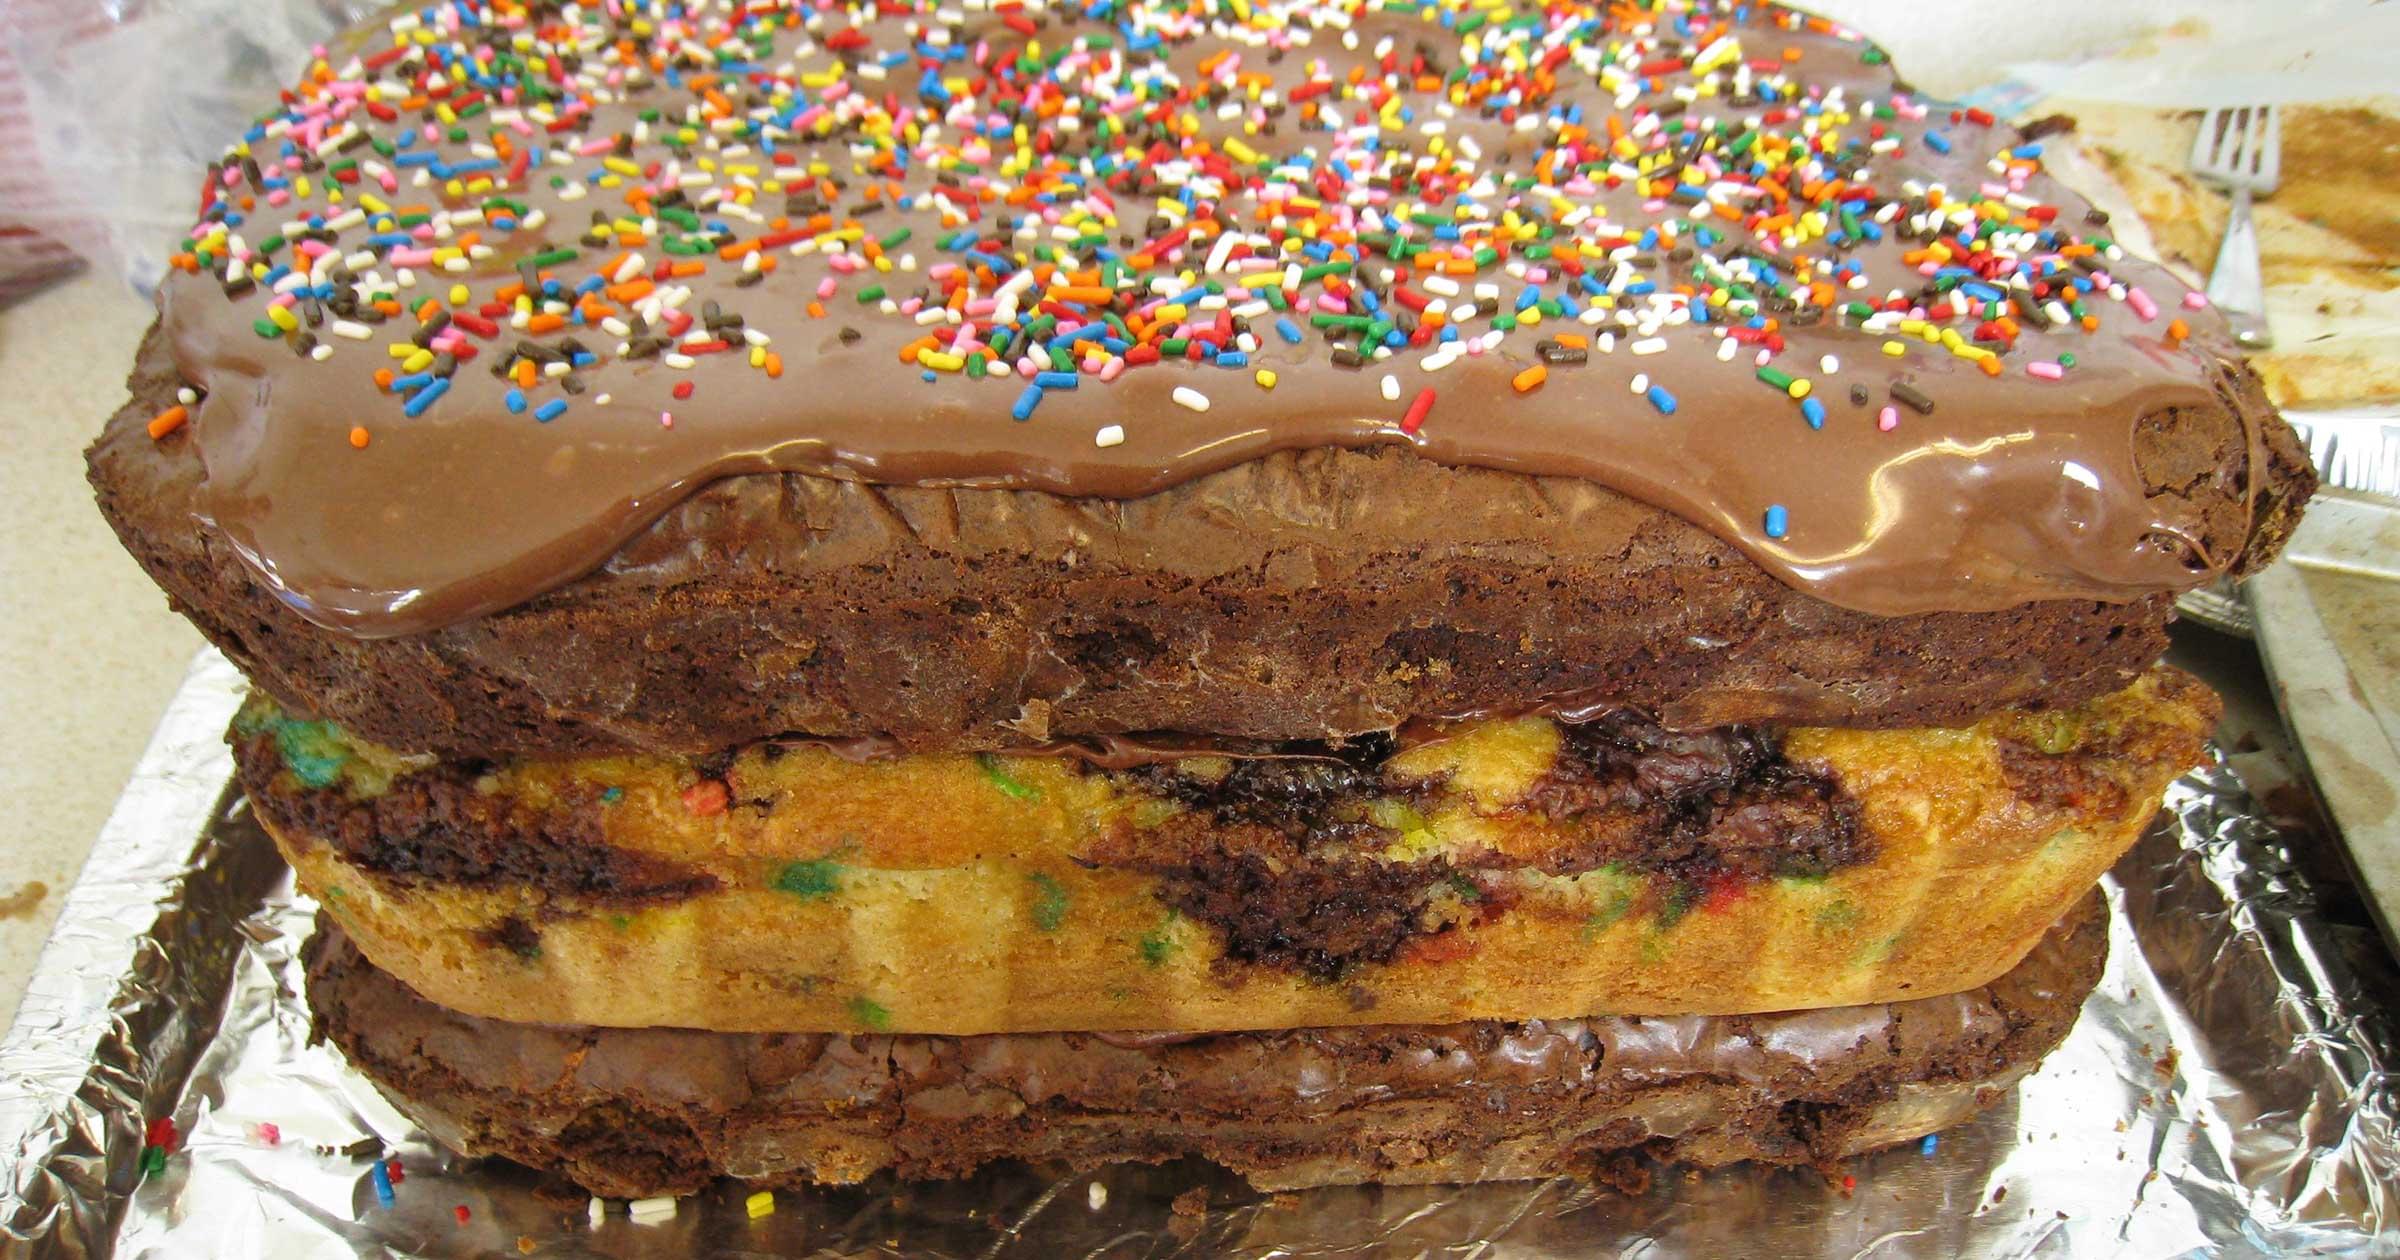 Three thick layers of alternating dark and light cake covered with Nutella and sprinkles.